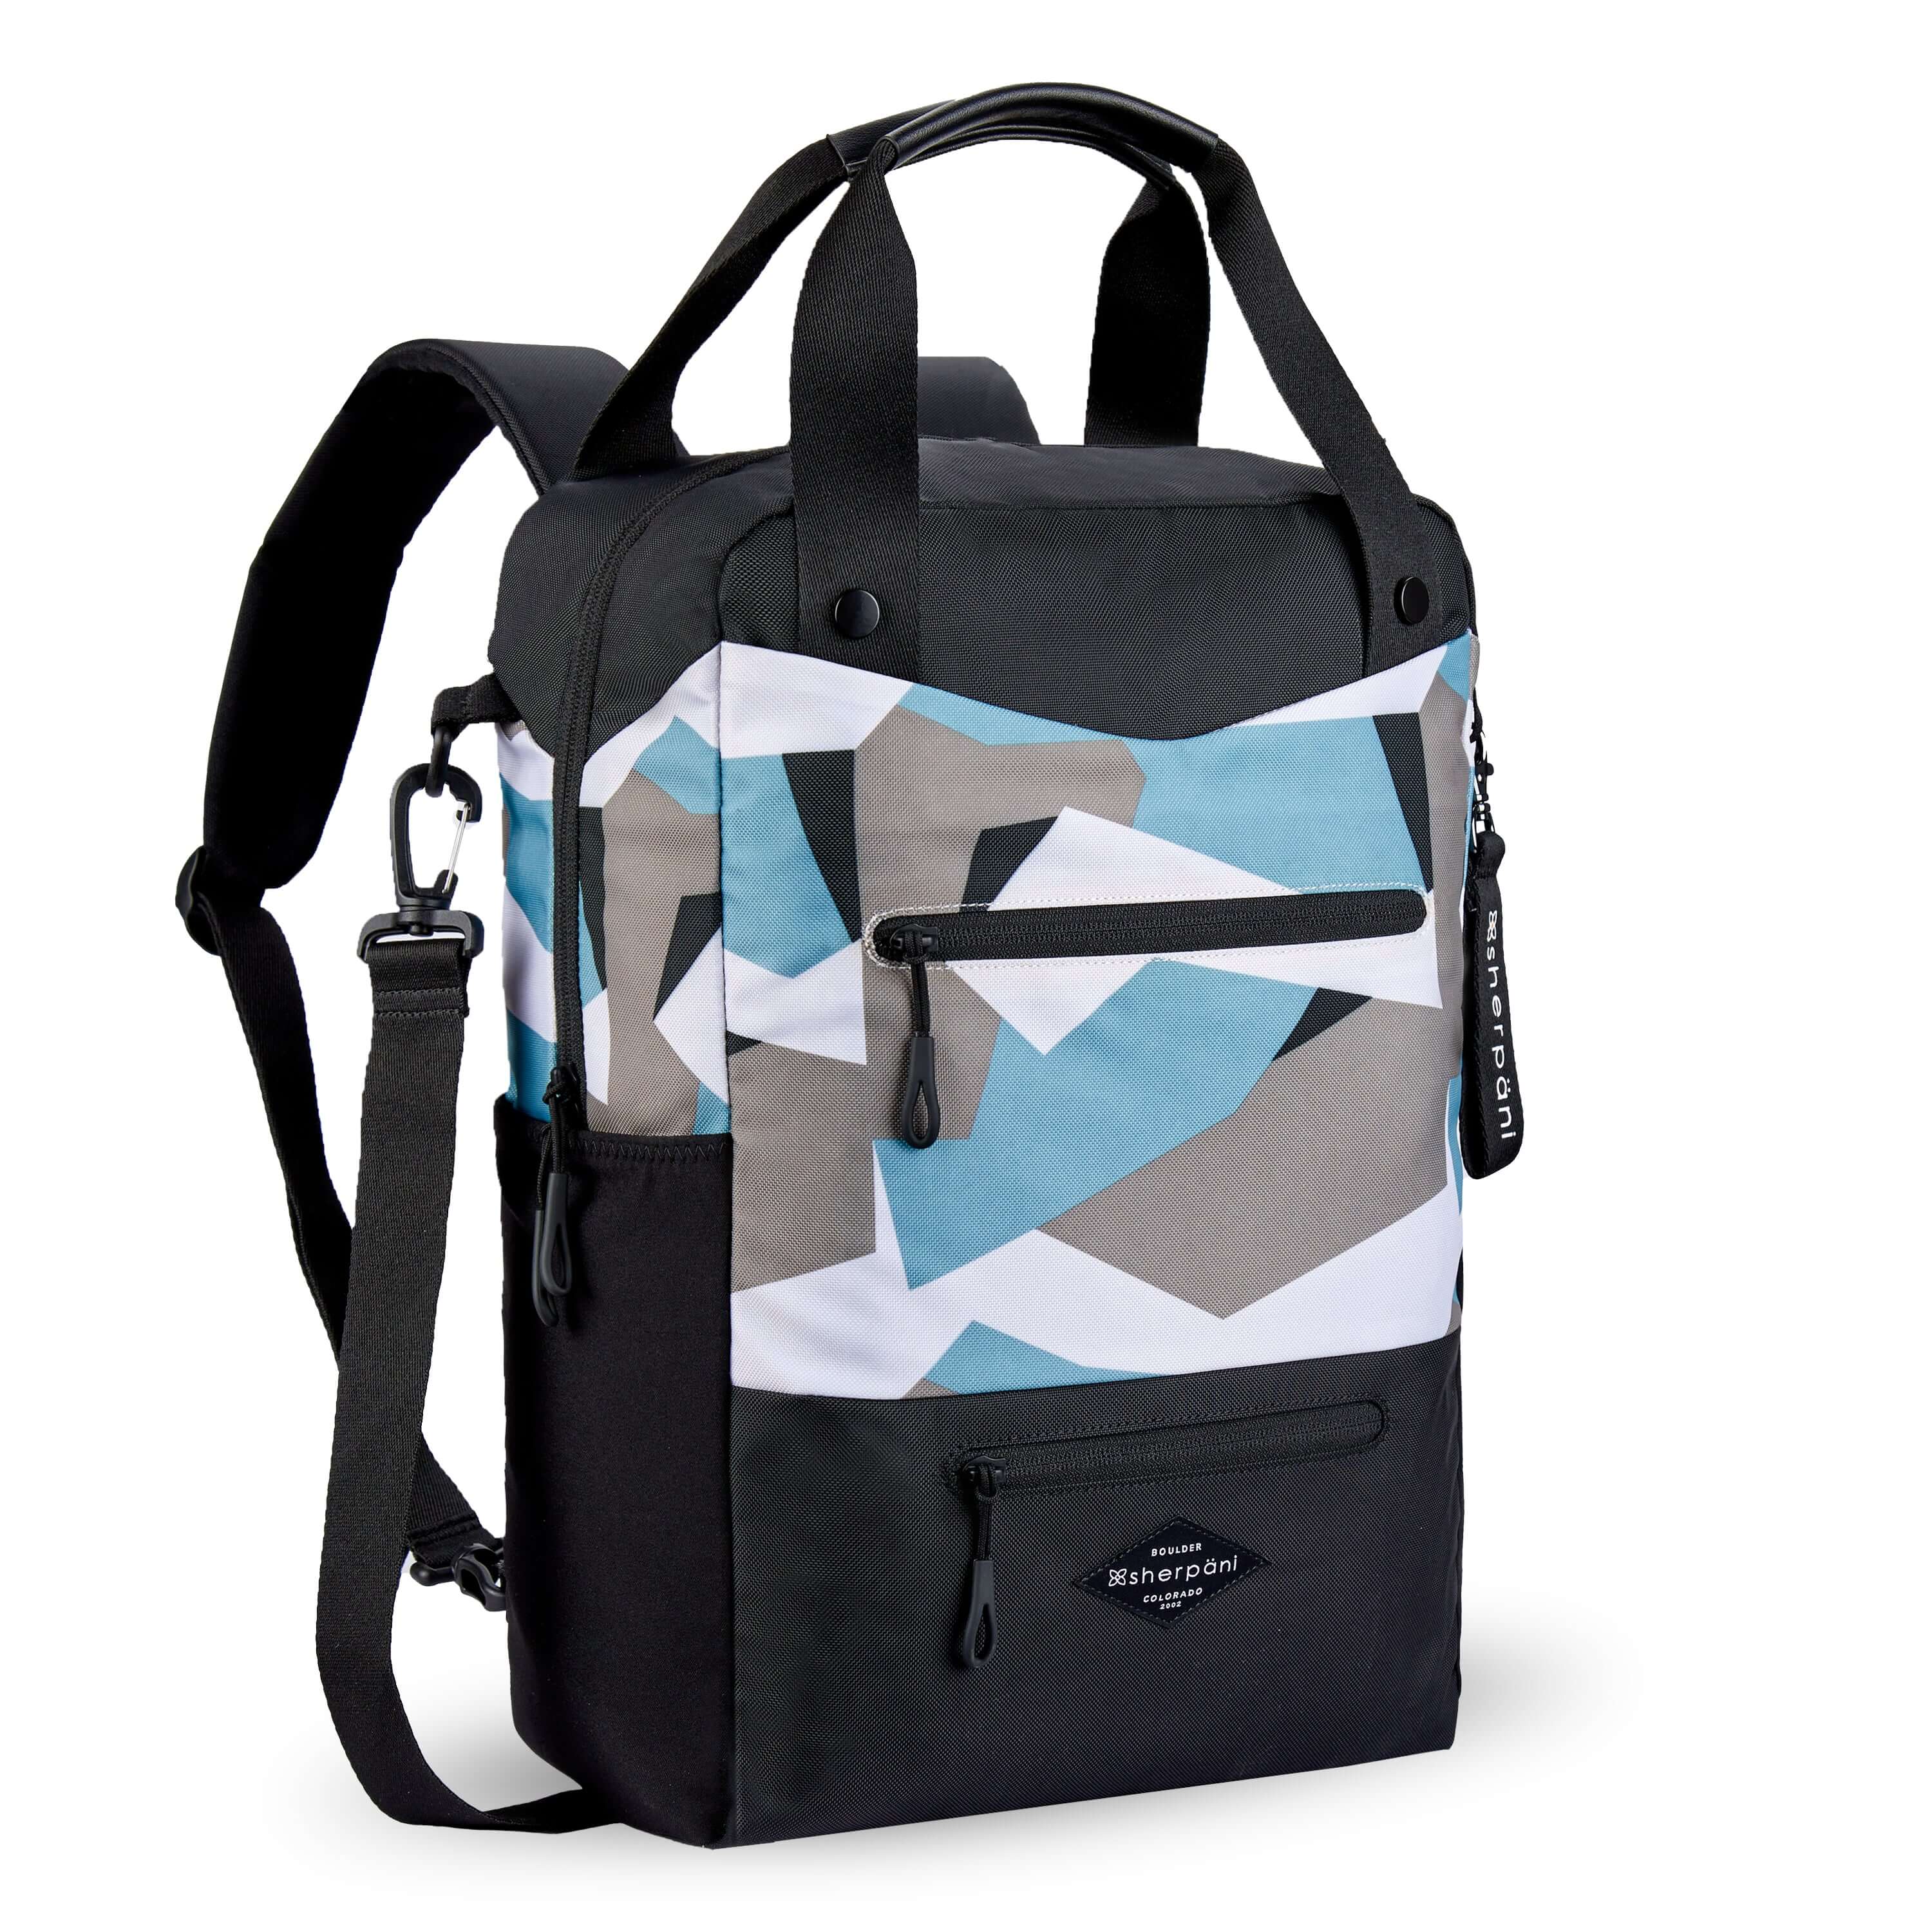 Angled front view of Sherpani's three-in-one bag, the Camden in Summer Camo. The bag is two-toned in black and in a camouflage pattern of blue, grey and white. There are two external zipper pockets on the front panel with easy-pull zippers in black. A branded Sherpani keychain is clipped to the upper right corner. An elastic water bottle holder sits on either side of the bag. The bag has an adjustable/detachable crossbody strap, padded/adjustable backpack straps and short tote handles fixed at the top.